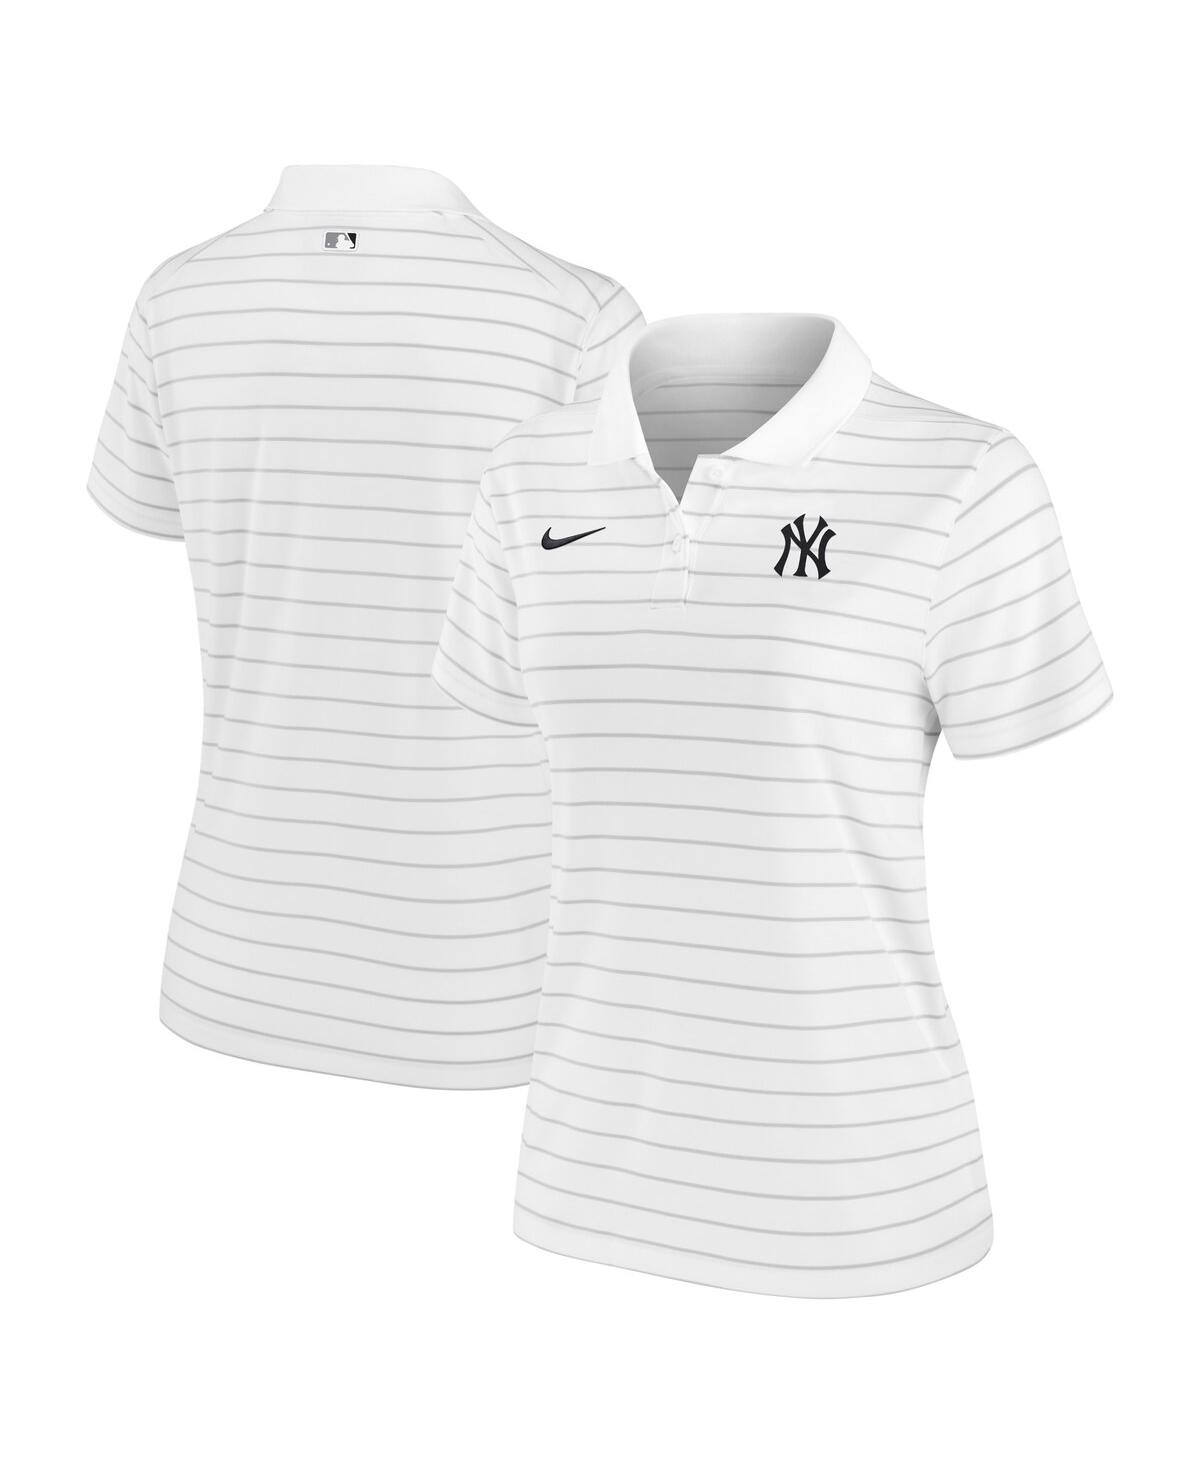 Women's Nike White New York Yankees Authentic Collection Victory Performance Polo Shirt - White